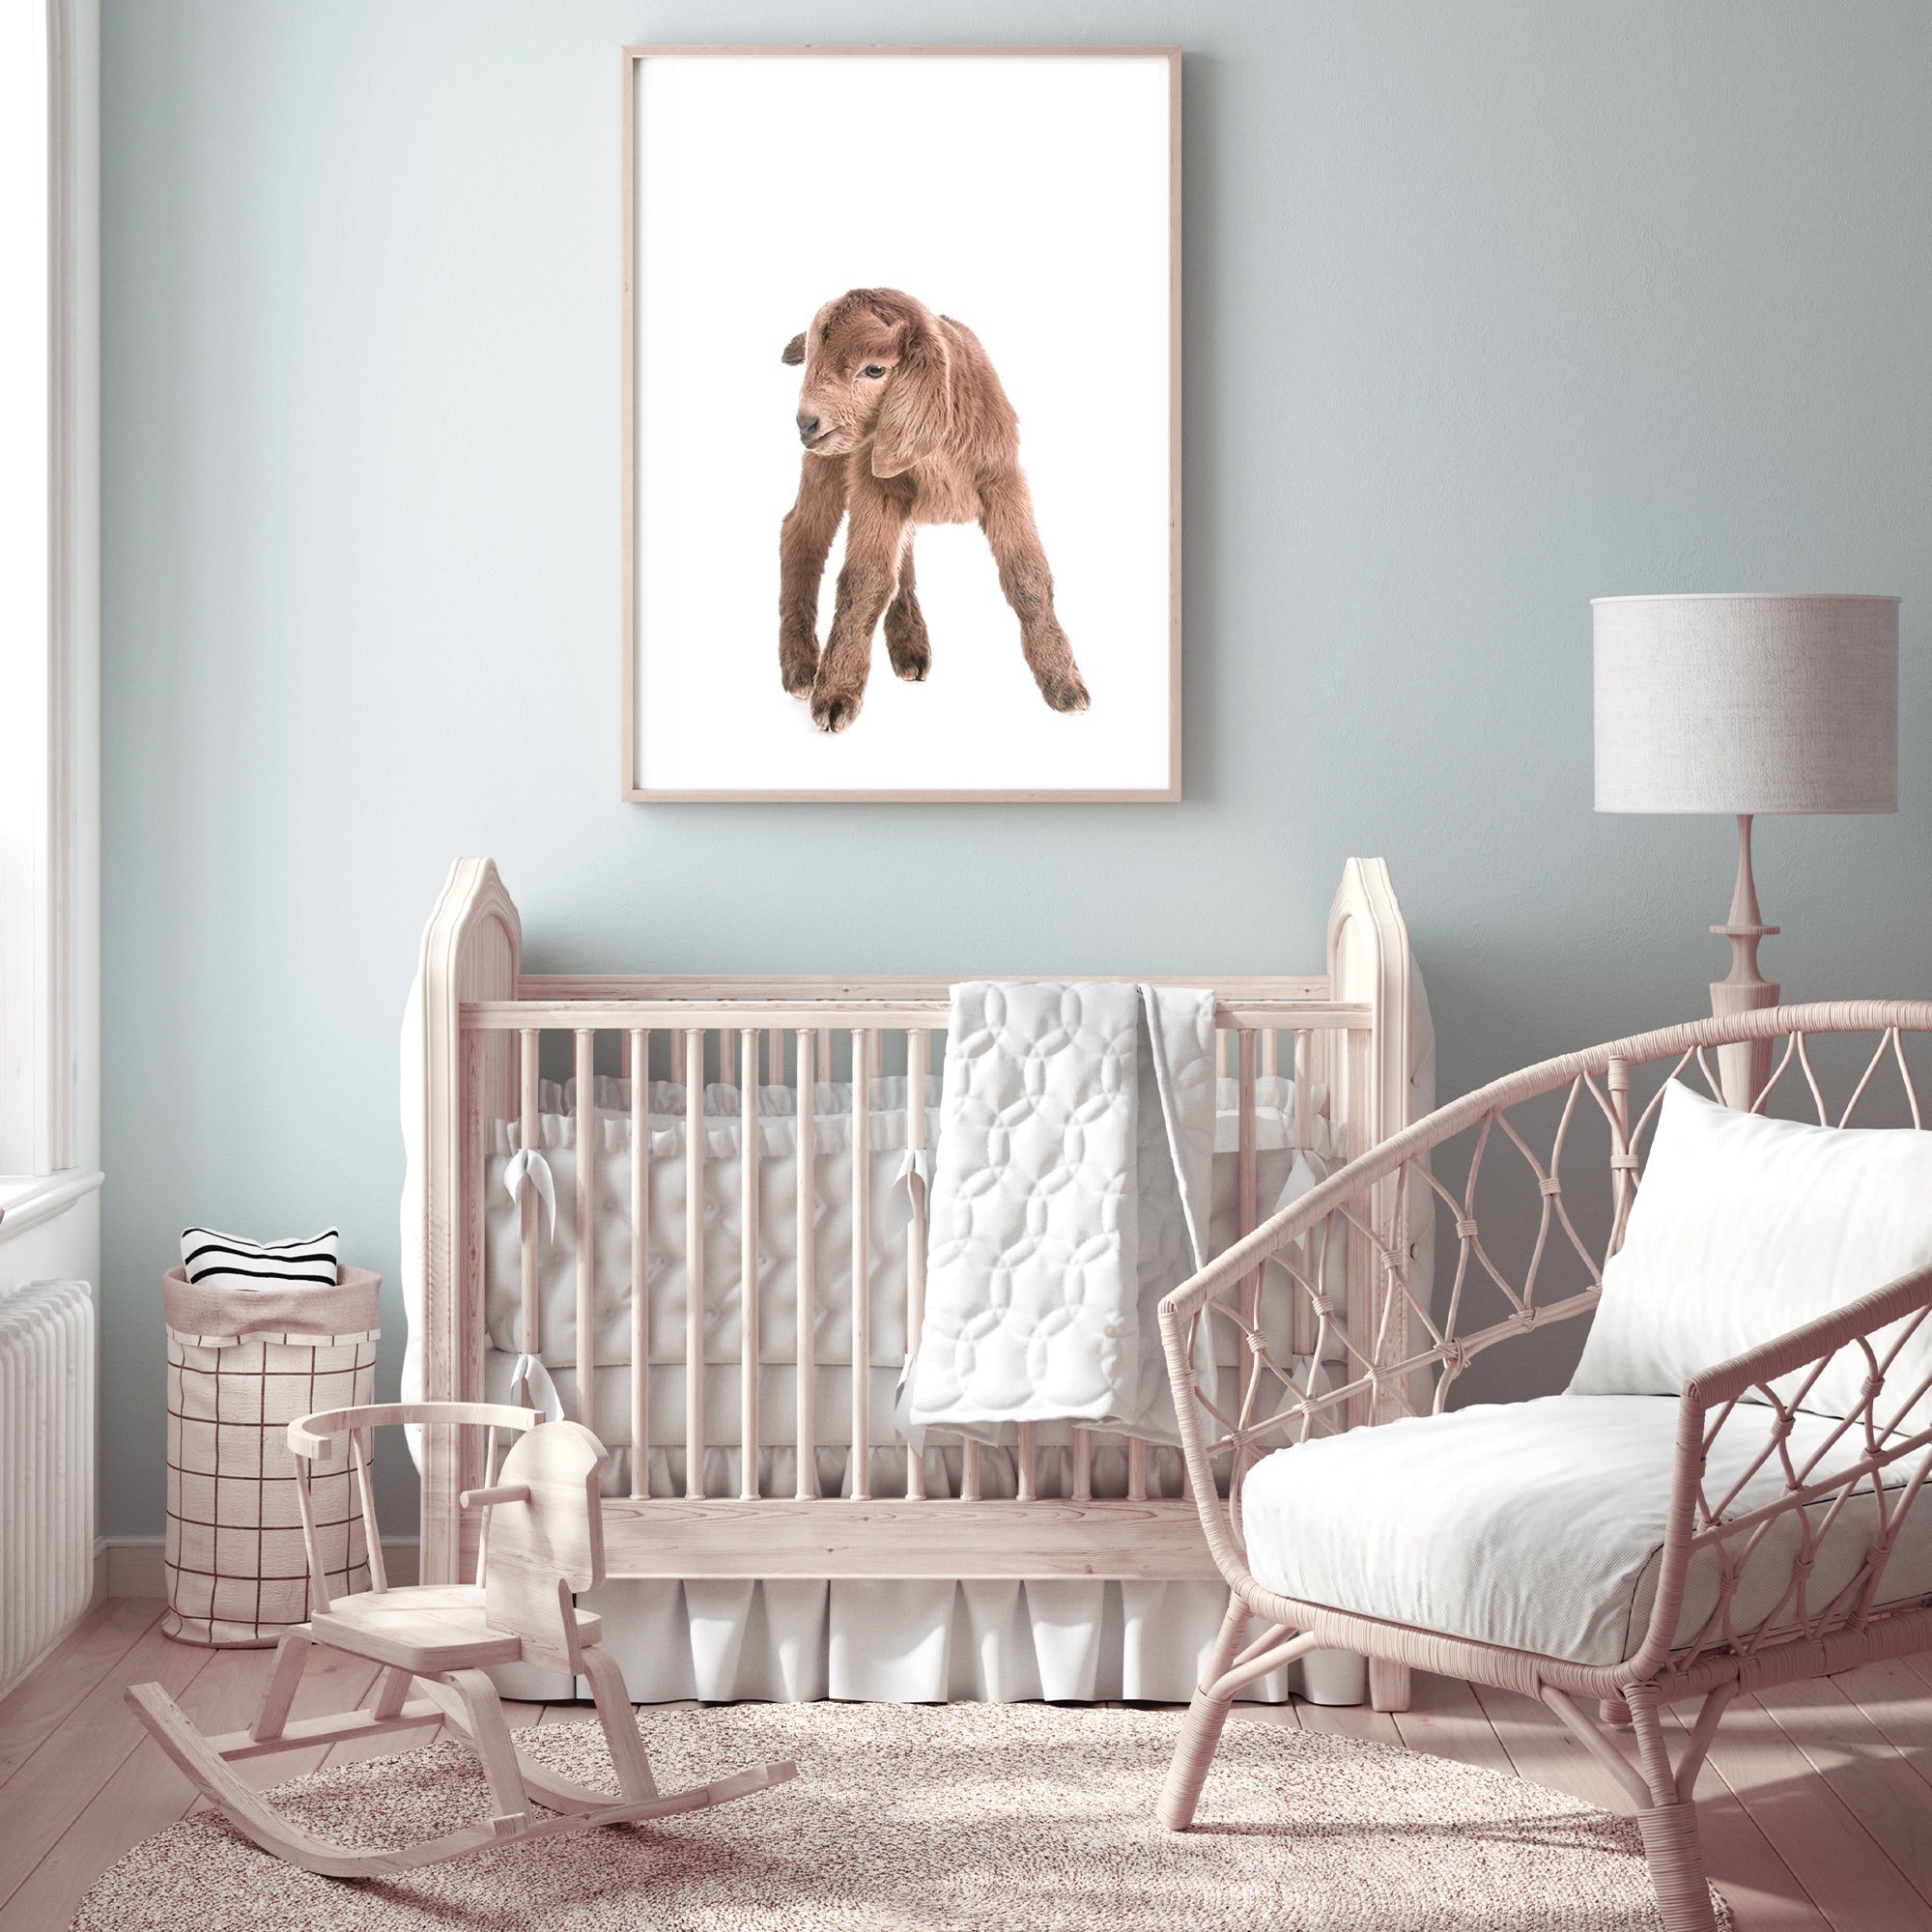 Perfect for your baby nursery, featuring the animal Baby Goat photo art print, available in an unframed poster print, stretched canvas or with a timber, white or black frame.